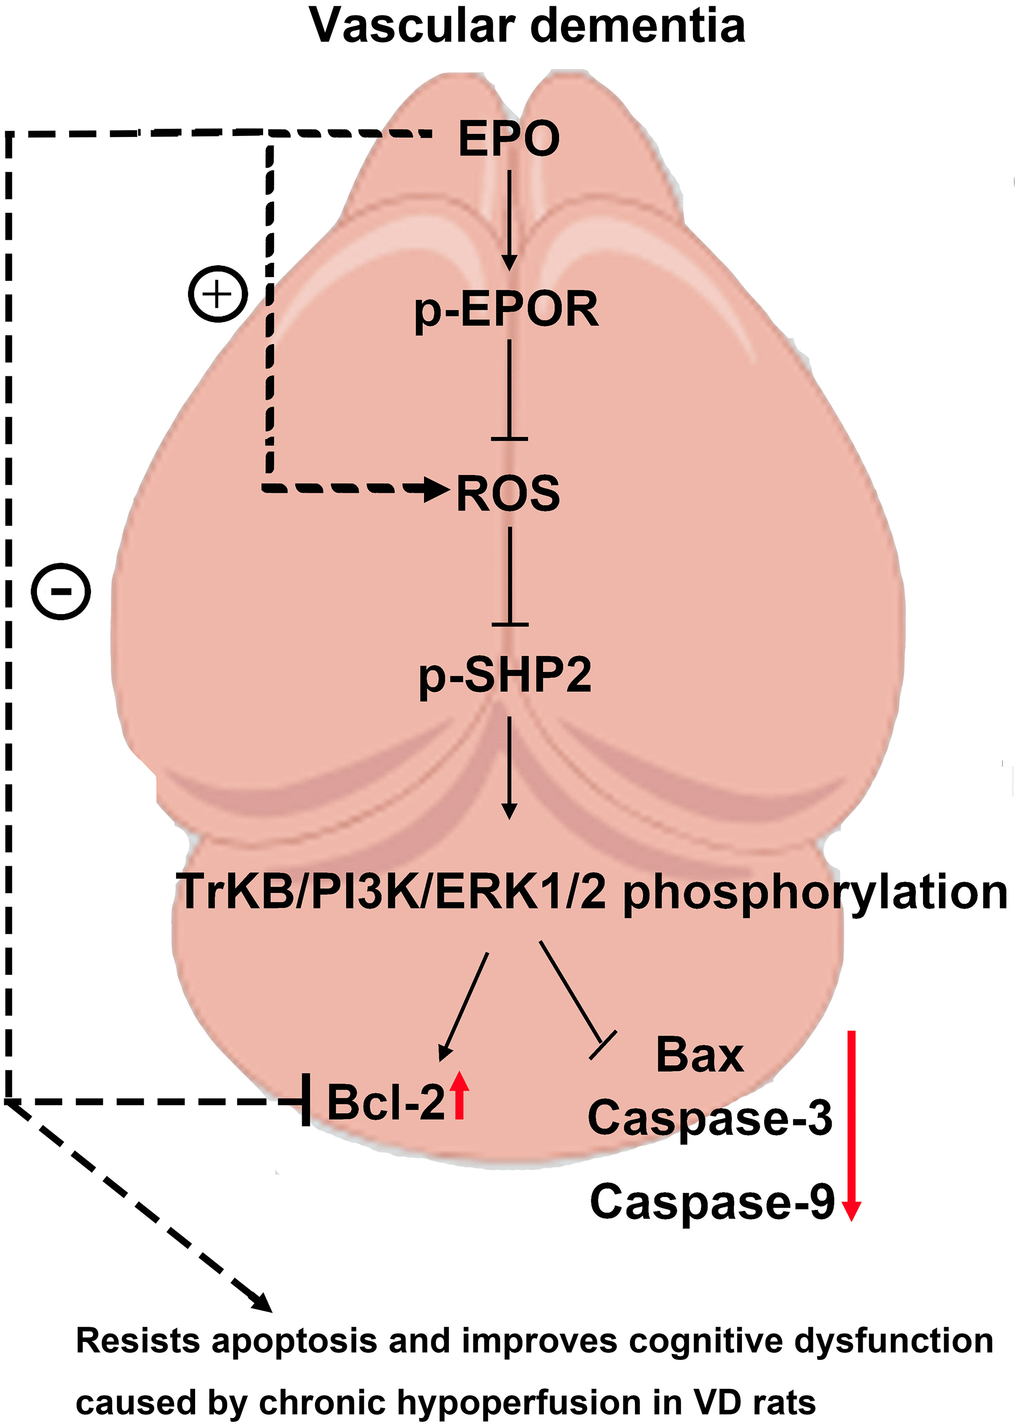 EPO can regulate the oxidative stress in hippocampal neurons, thereby resisting apoptosis and inhibiting inflammatory response through the BDNF/TrKB/PI3K/ERK1/2 axis to effectively ameliorate the cognitive dysfunction caused by chronic hypoperfusion in VD rats.